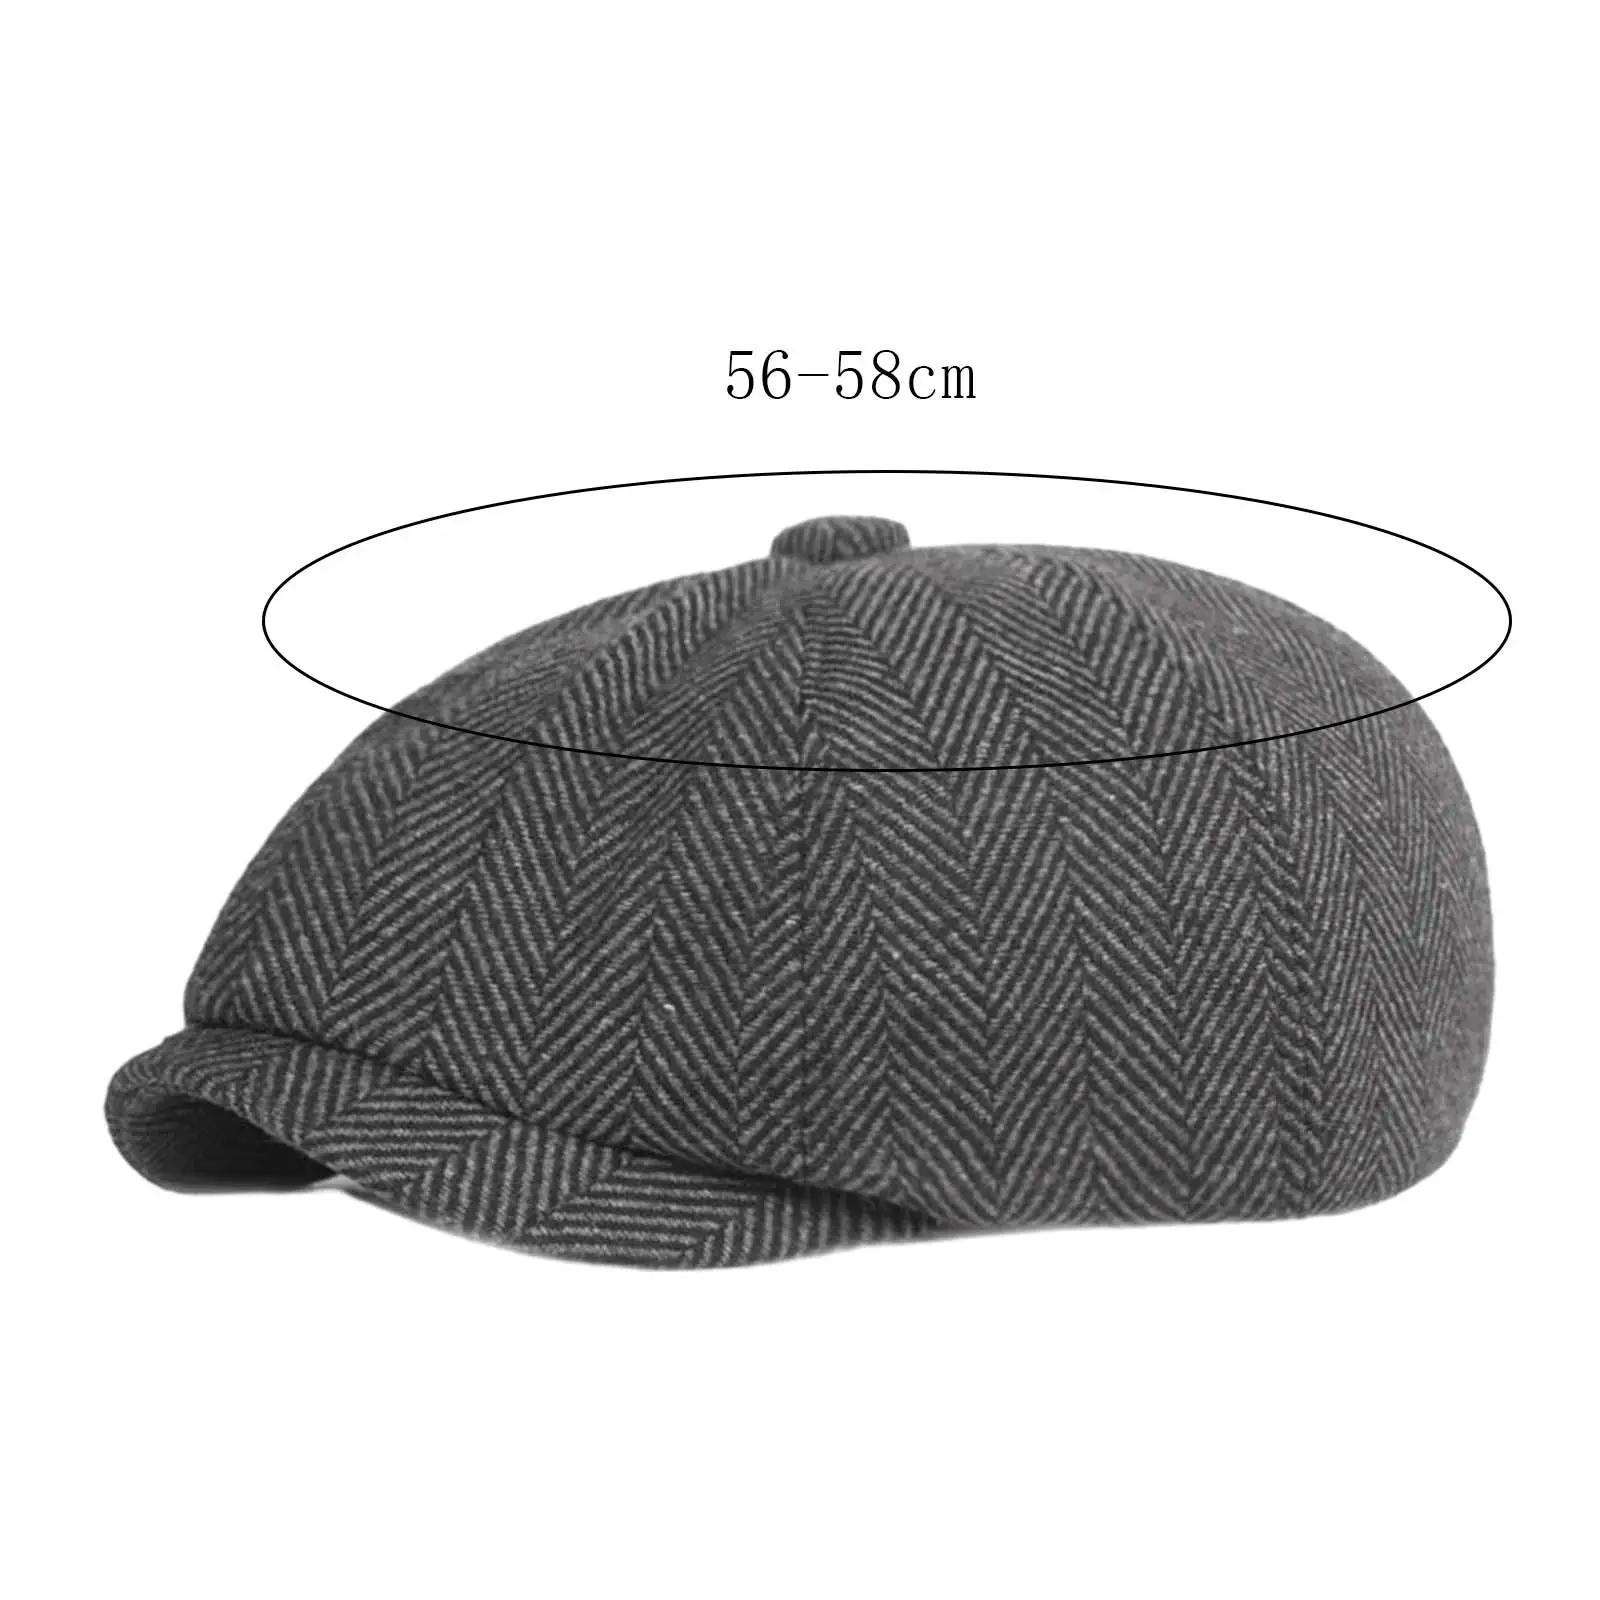 Beret Hat Classic Birthday Gift Newsboy Cap Baker Boy Hat Flat Caps for Men Flap Cabbie Hat for Hiking Camping Driving Traveling